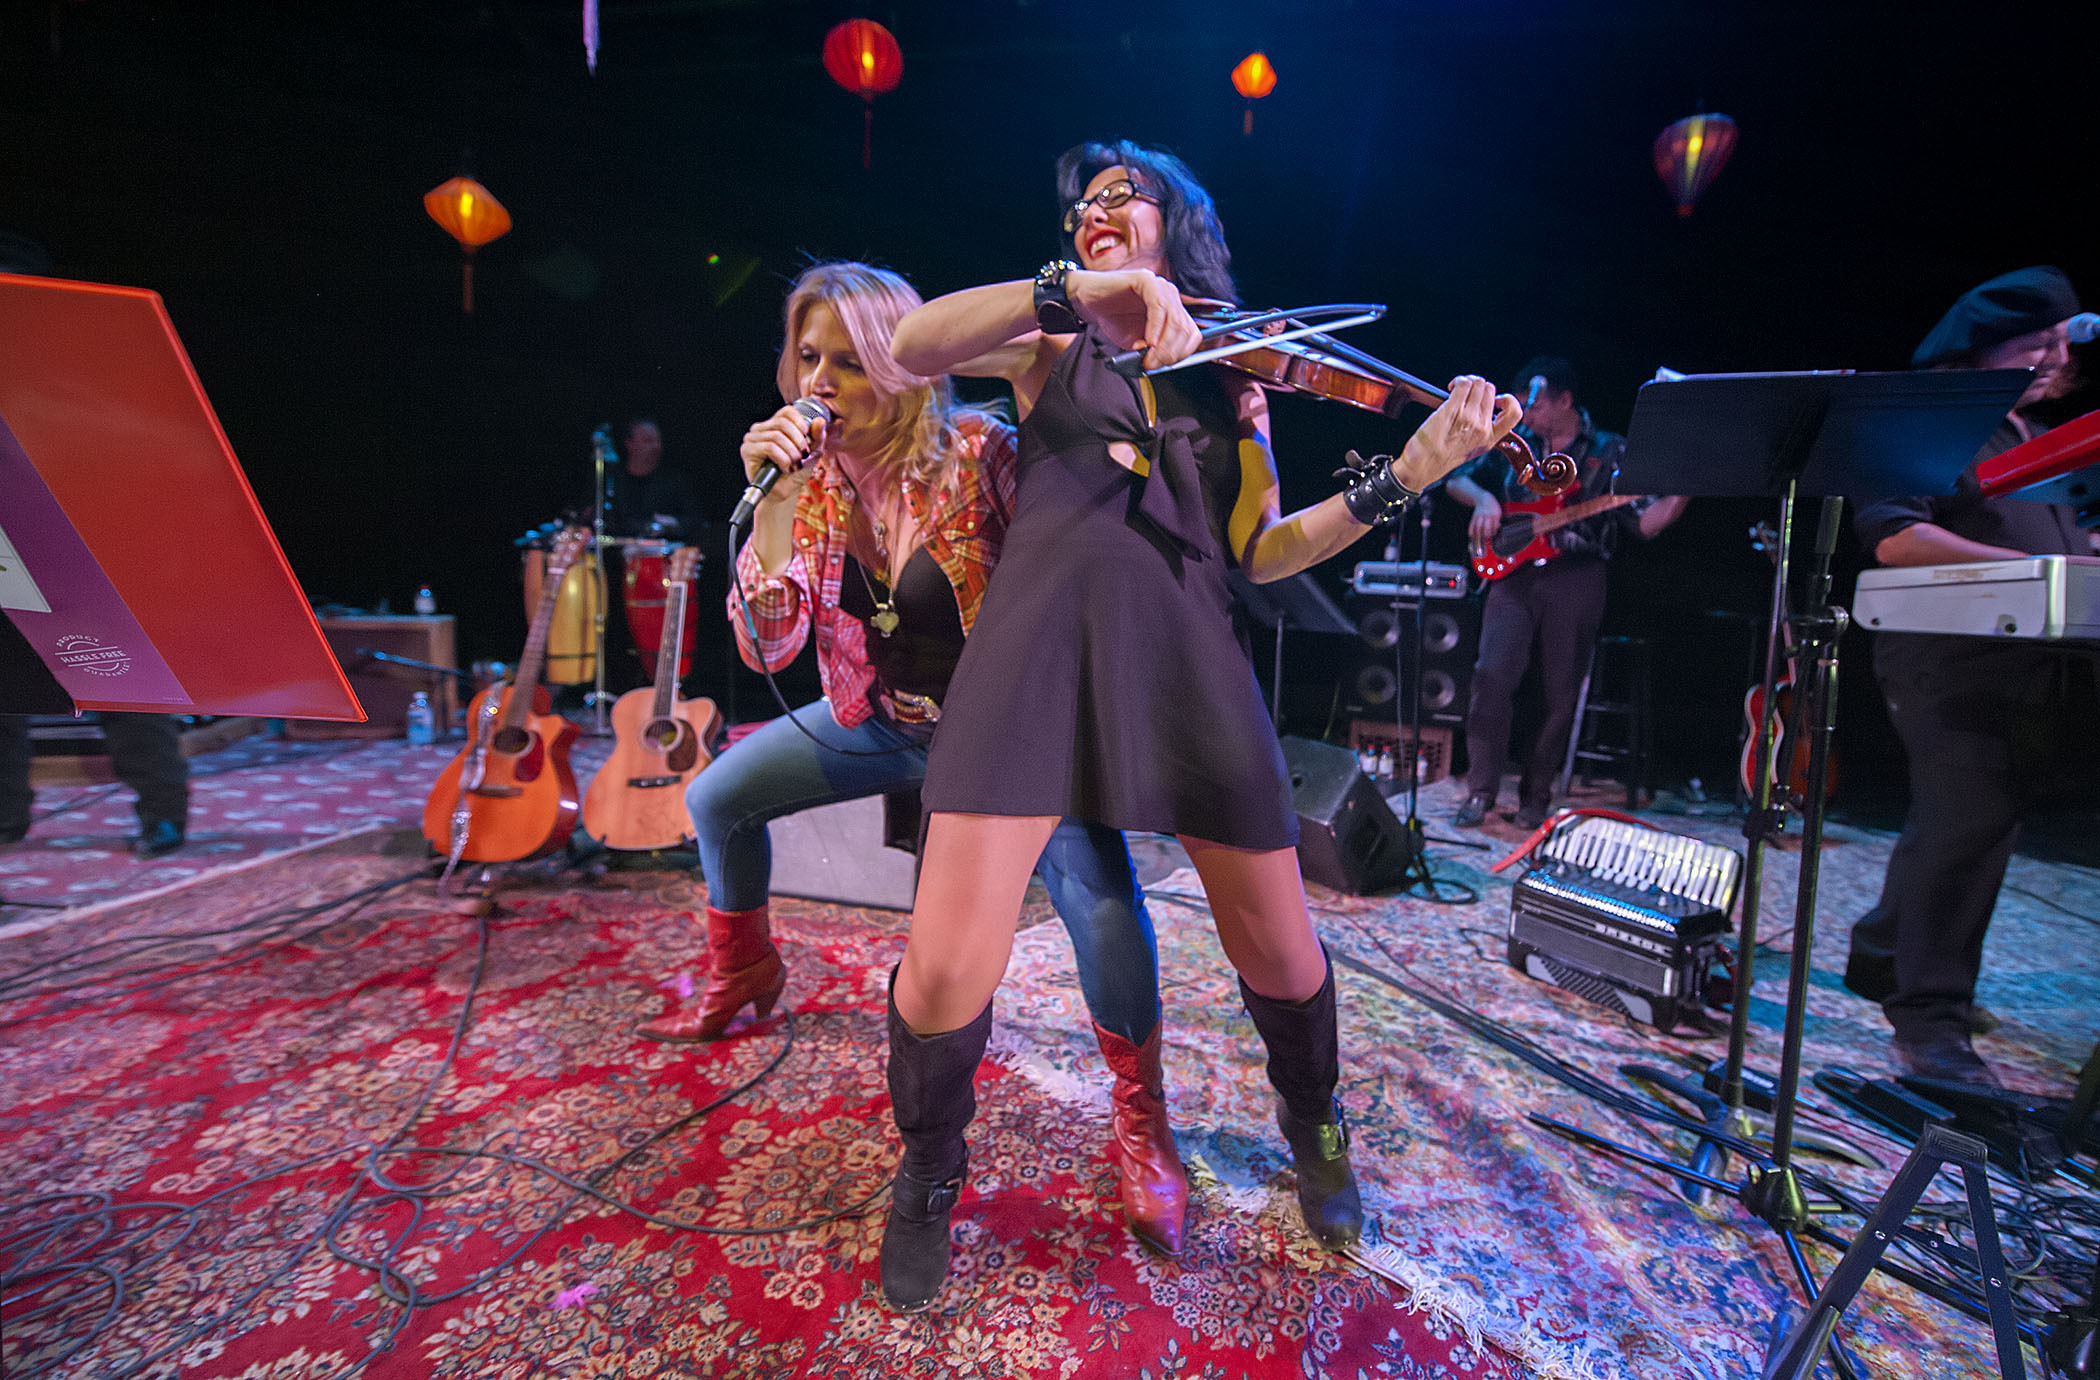 Nancy Atlas performing with Randi Fishenfeld at Bay Street Theater during the Fireside Session on January 2, 2016.